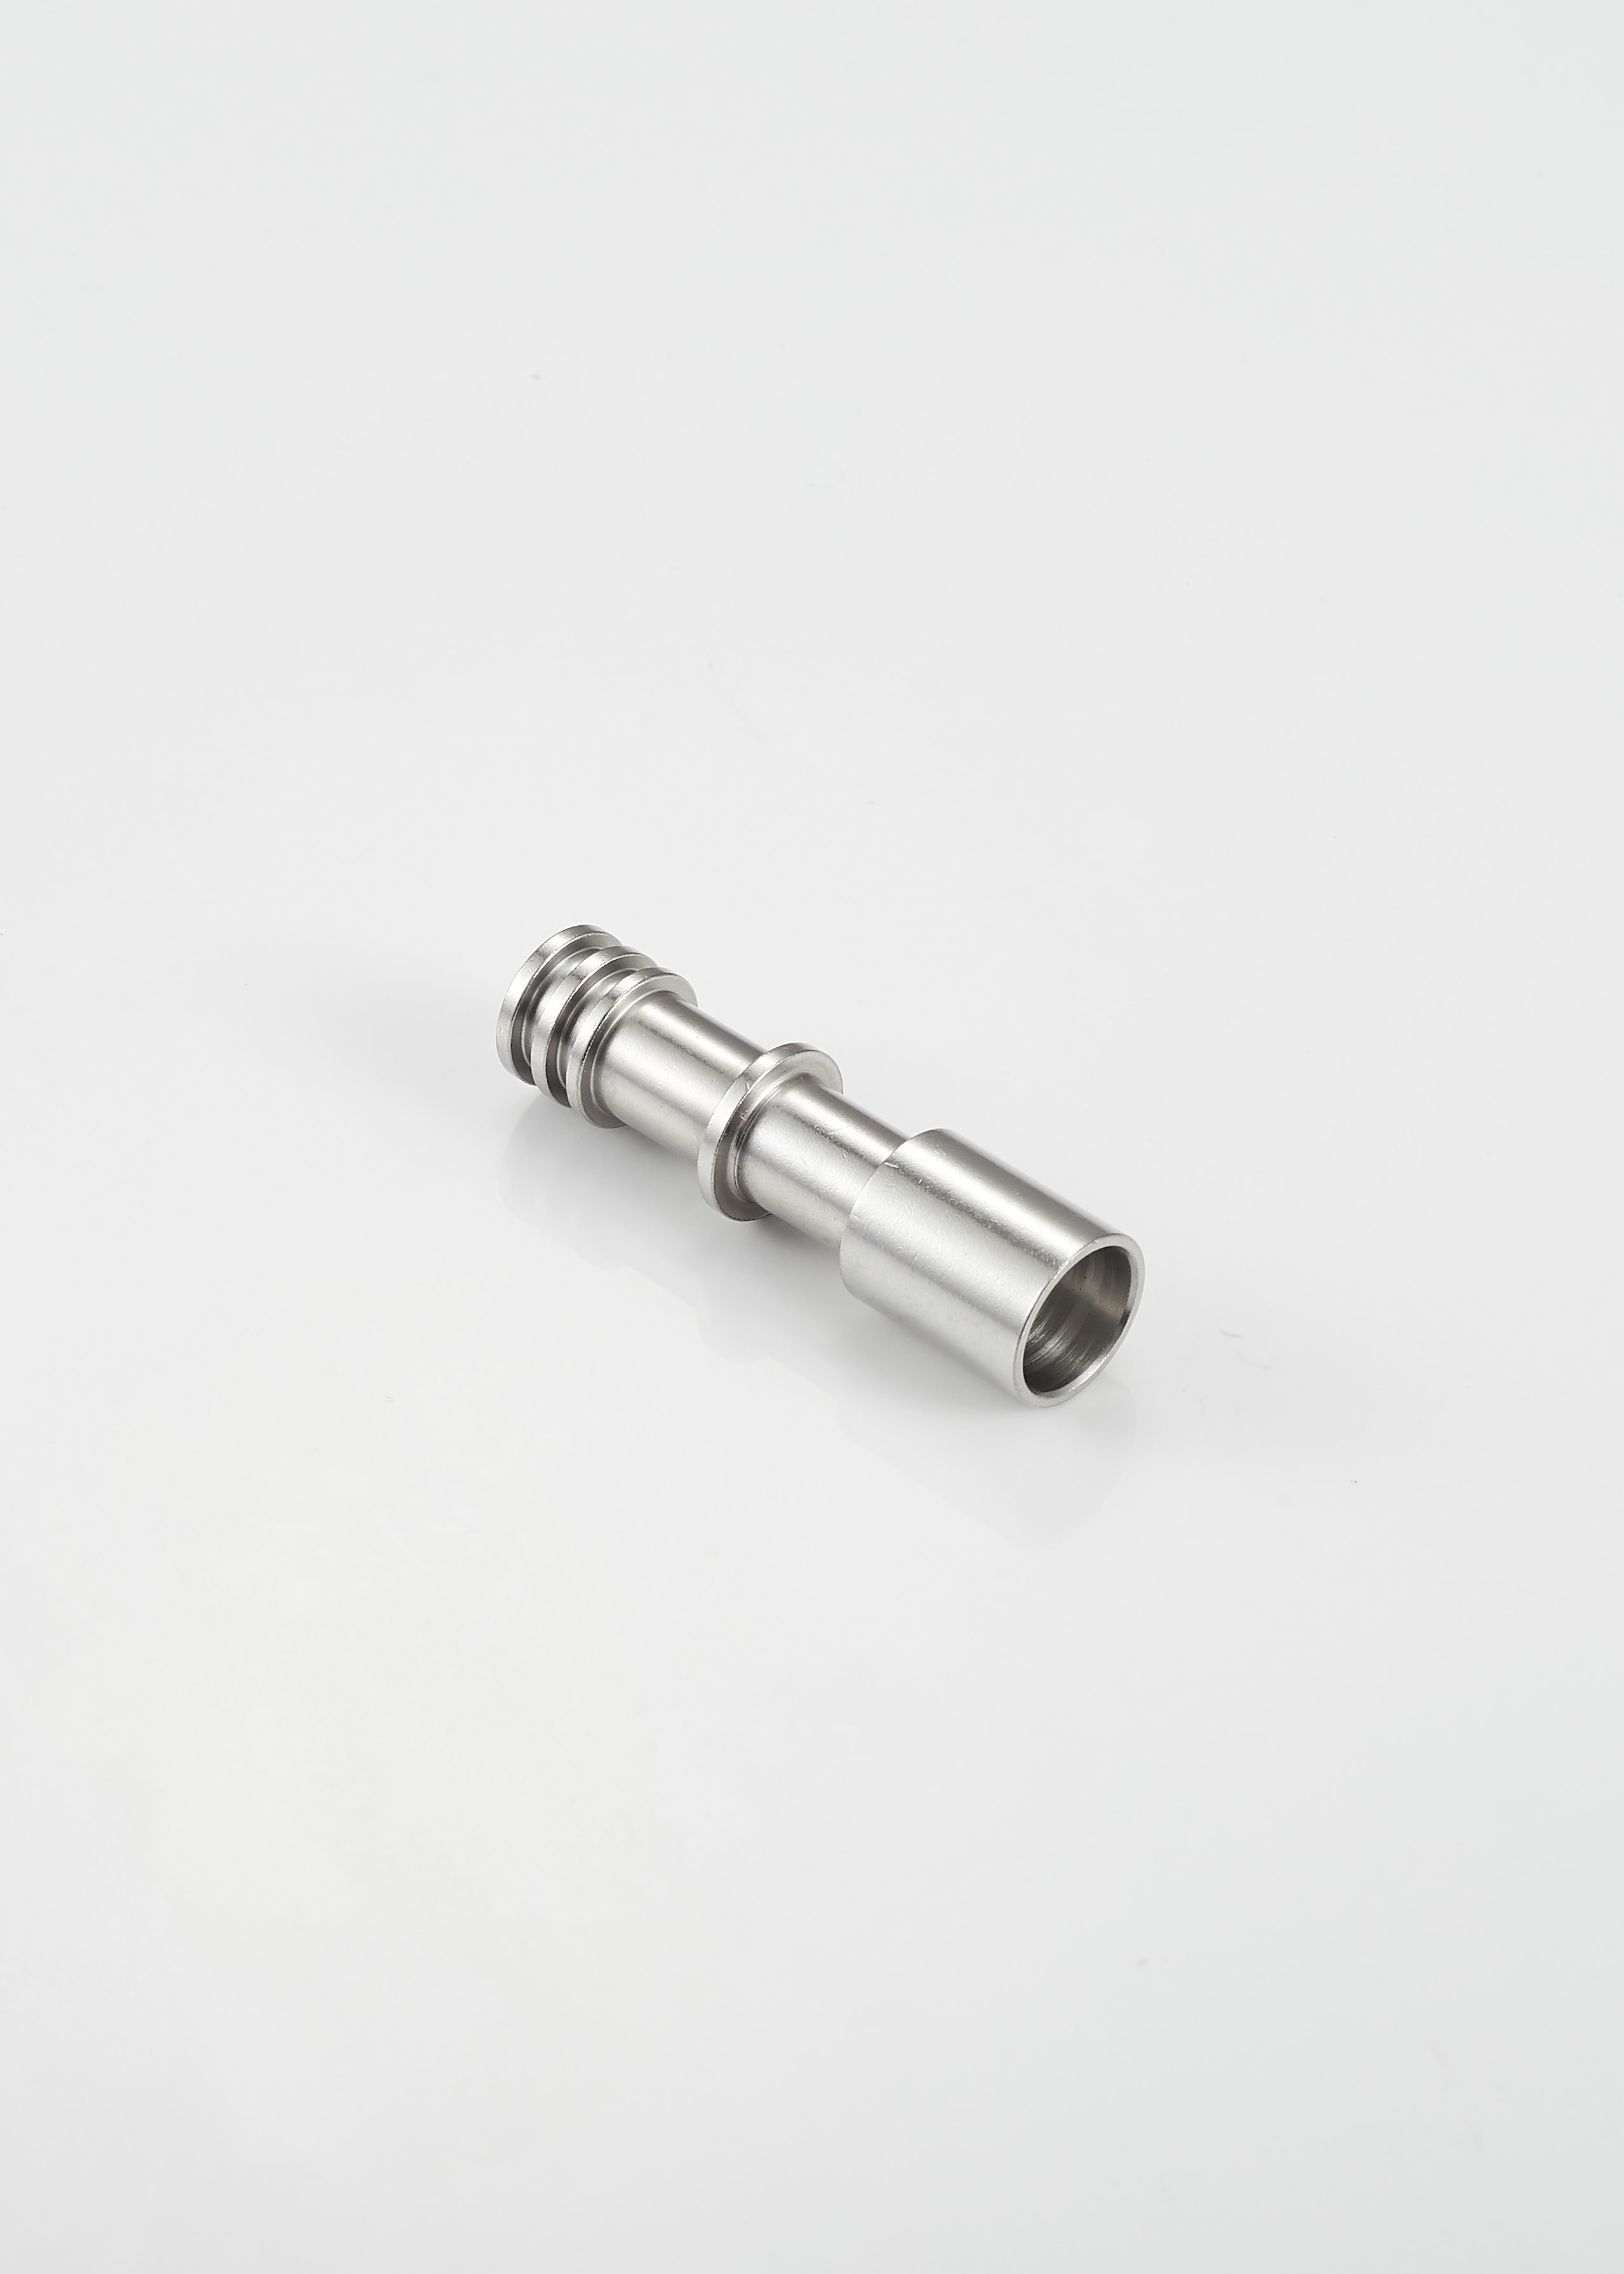 Wholesale SS303 Length 50.5mm CNC Machining Parts Stainless Steel Threaded Tube from china suppliers